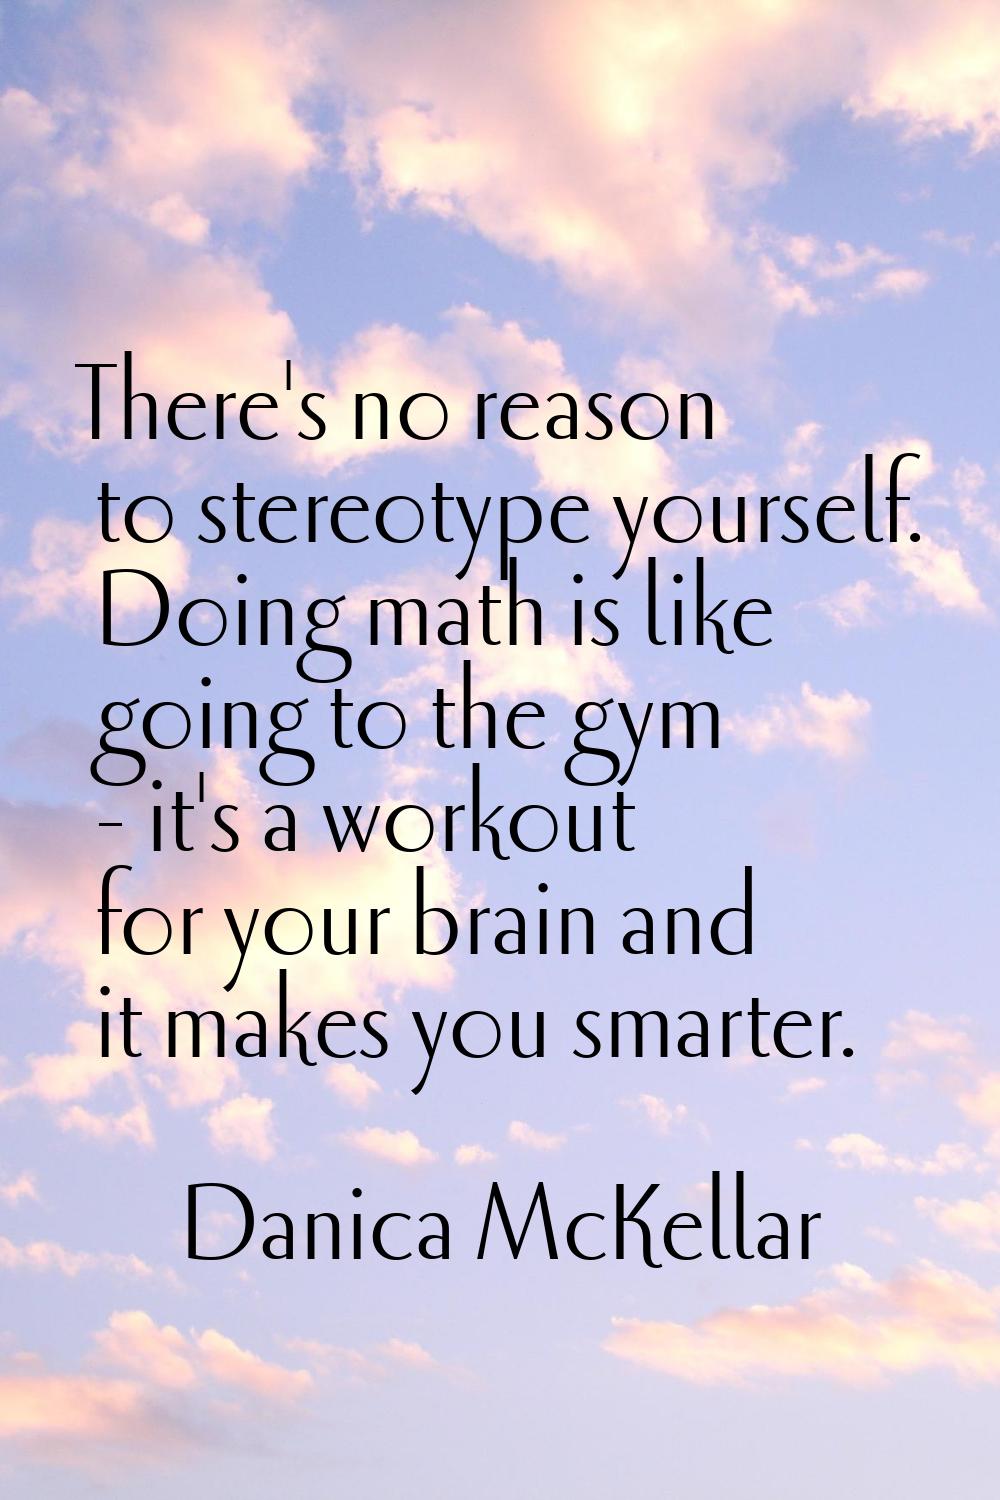 There's no reason to stereotype yourself. Doing math is like going to the gym - it's a workout for 